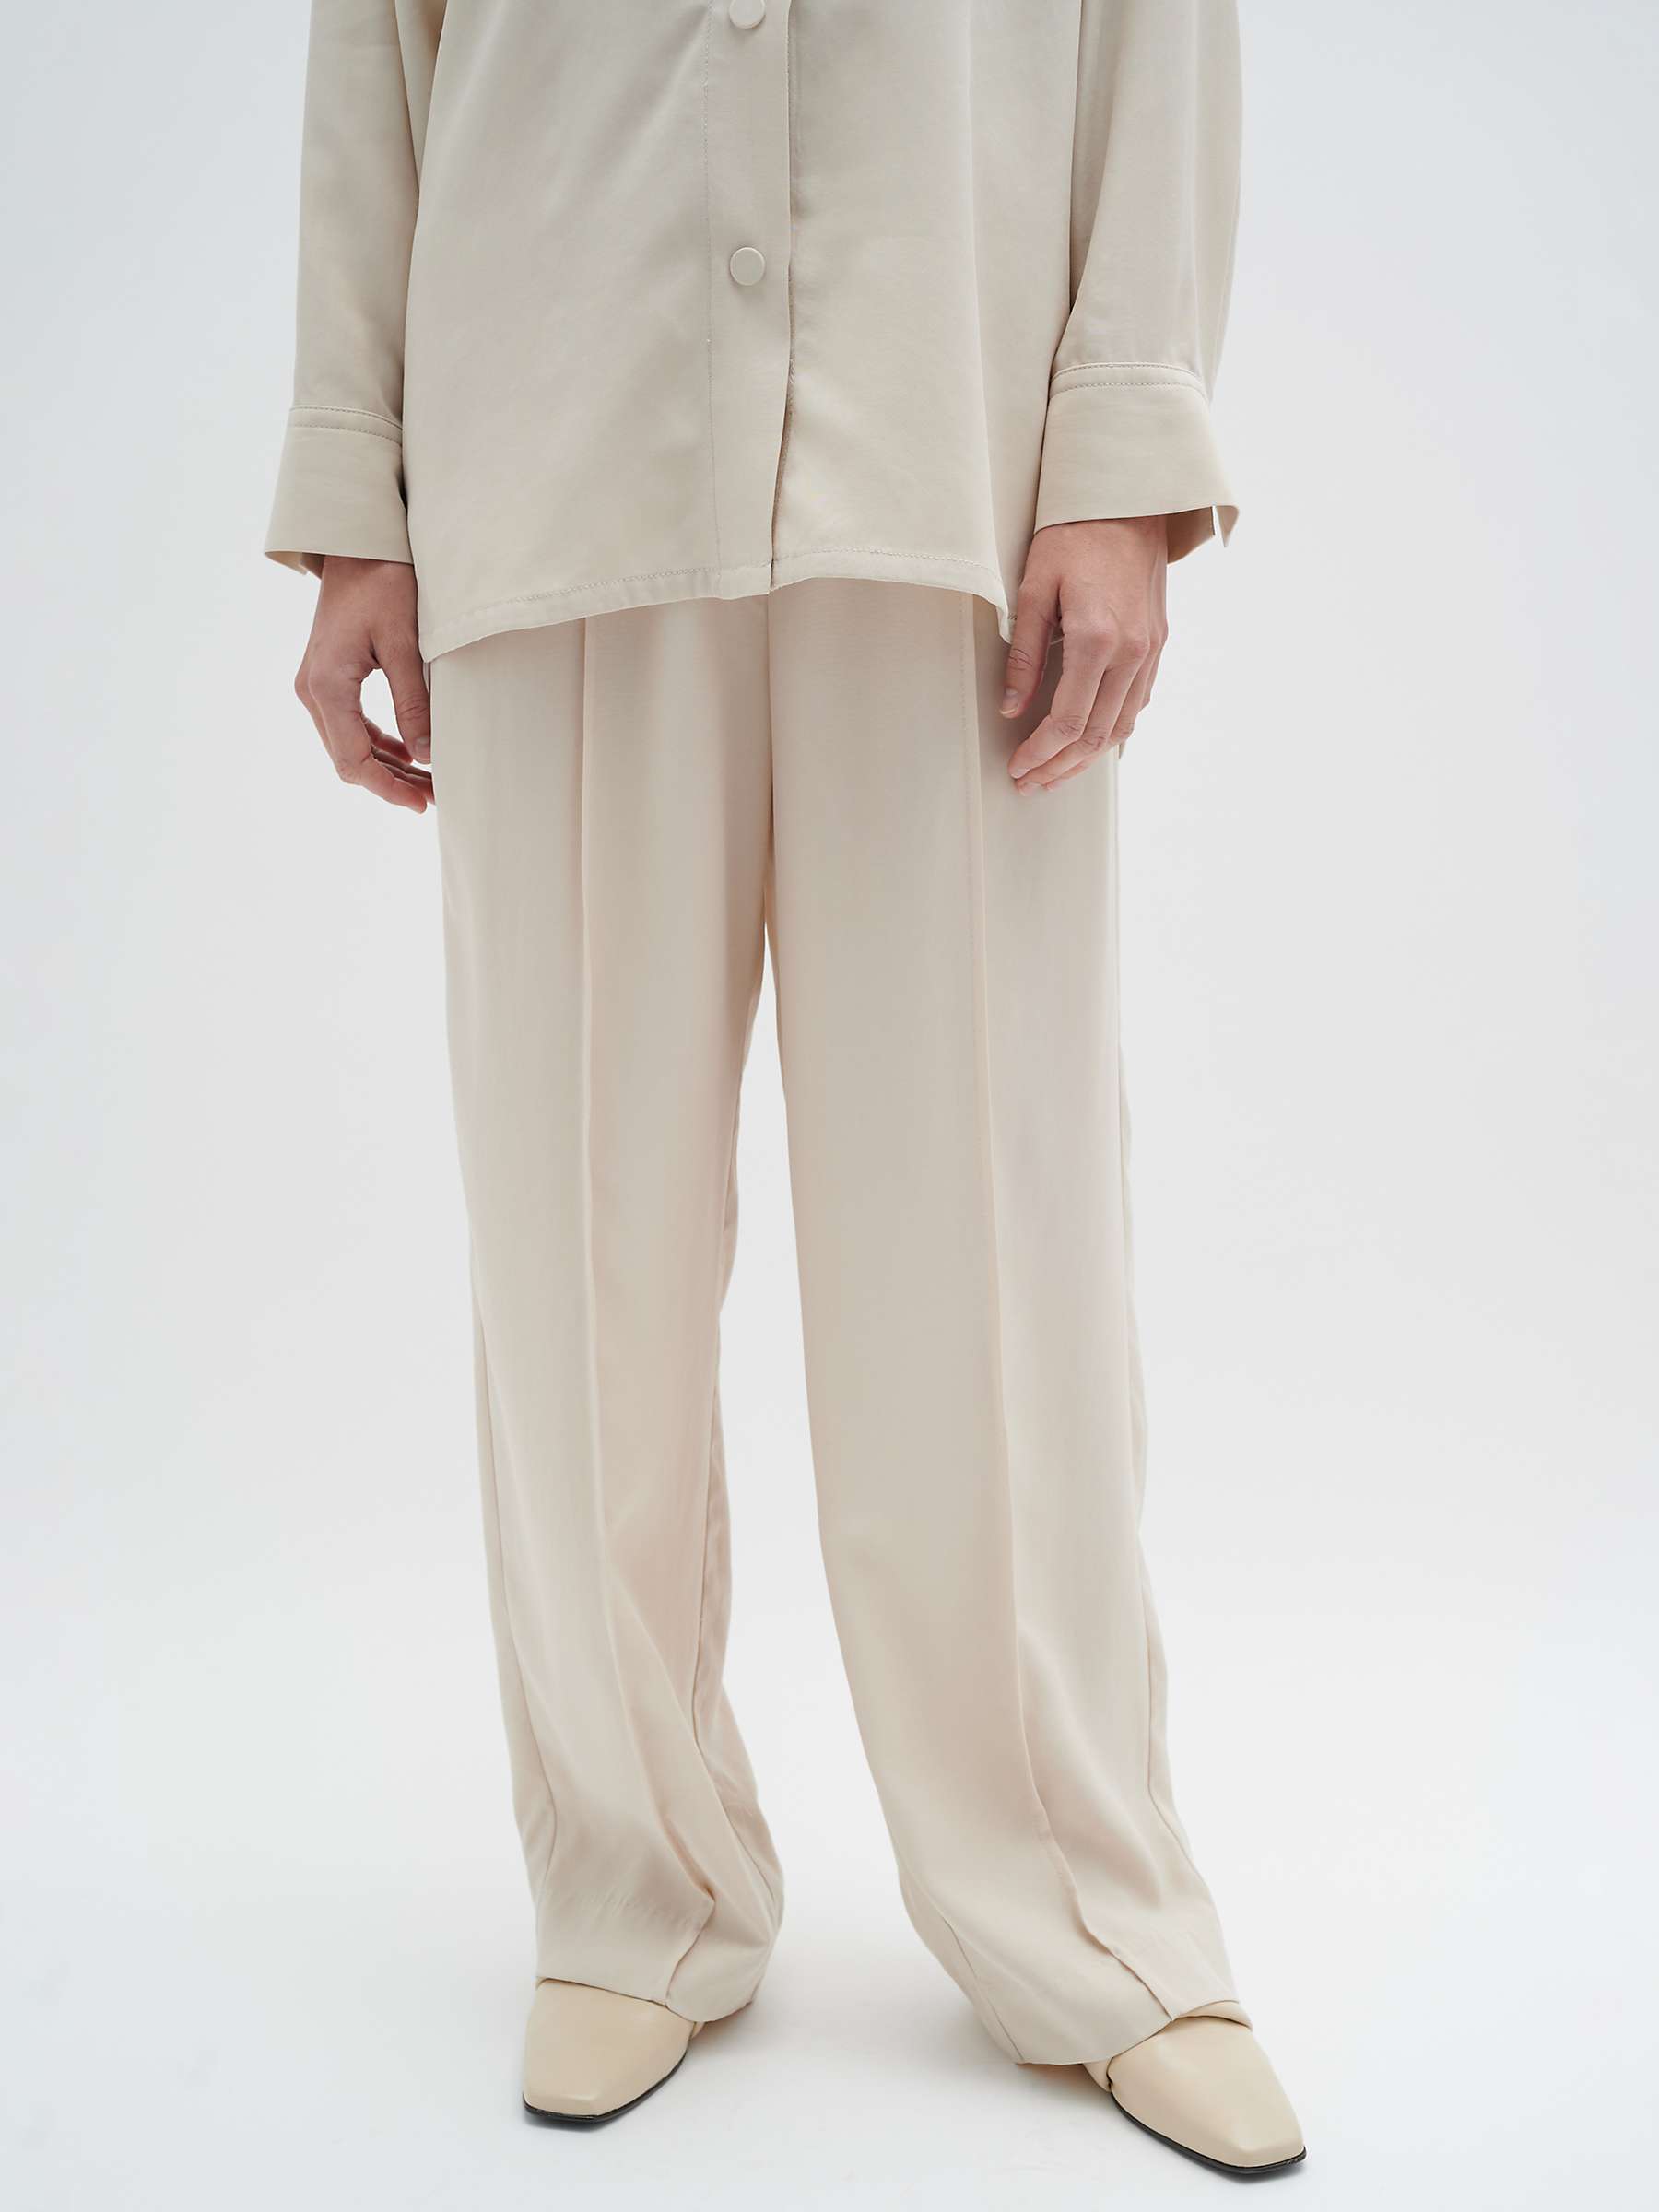 Buy InWear Pama Casual Trousers, French Oak Online at johnlewis.com